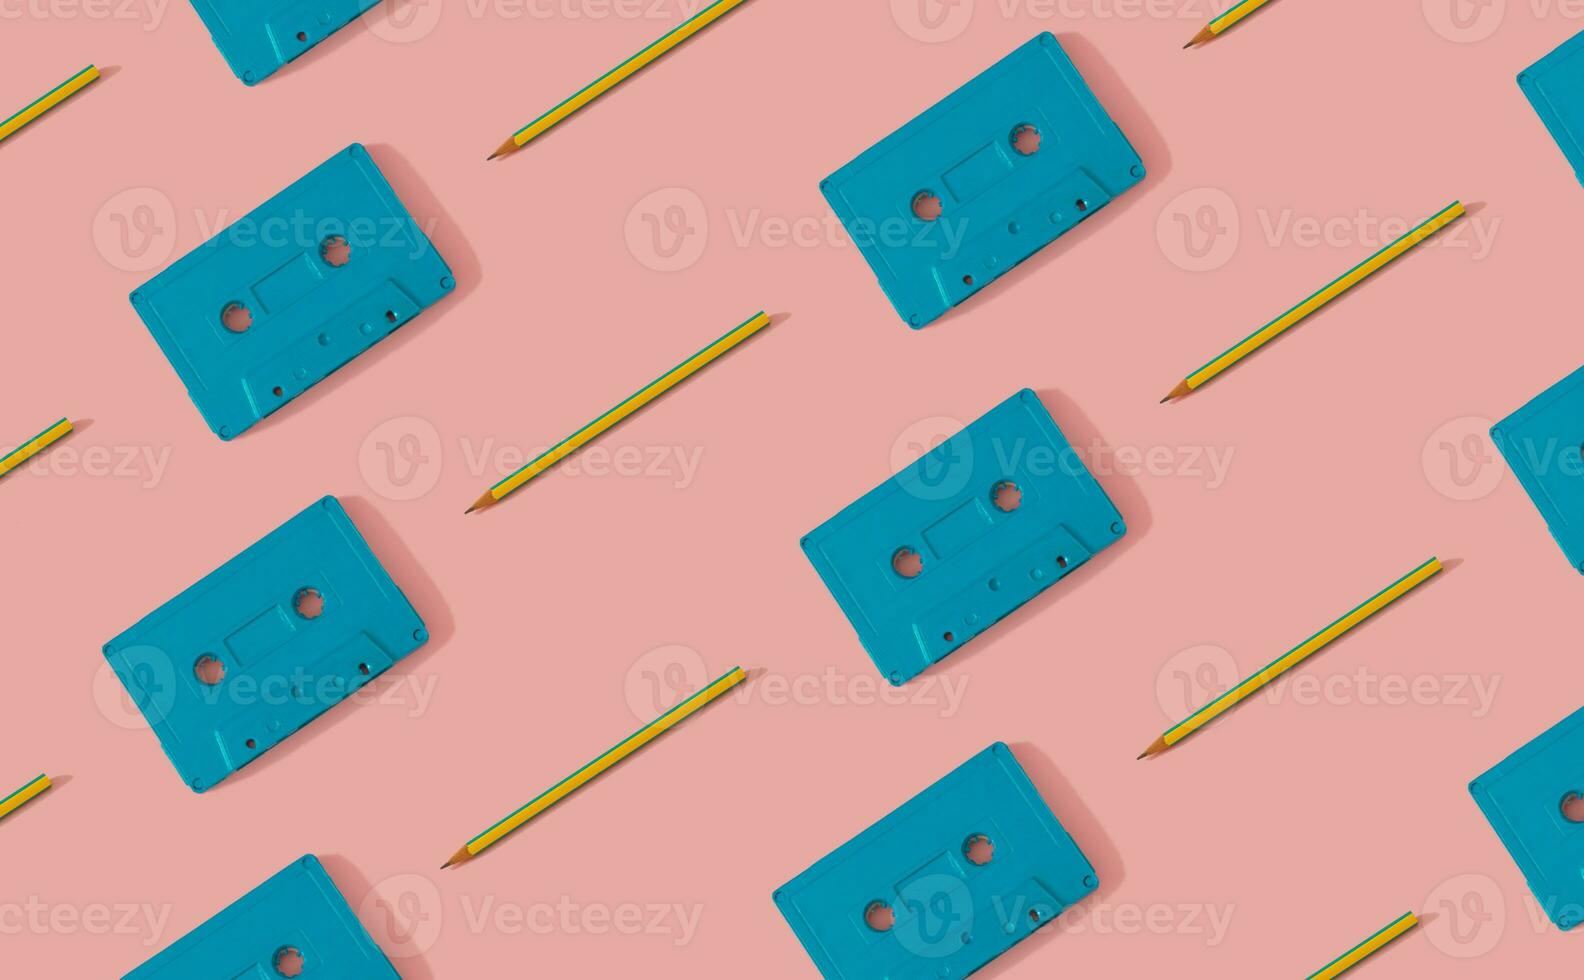 You're the pencil to my cassette tape. Retro cassette tapes and pencils pattern on light pastel pink background. Creative music old cassettes pattern. Retro fashion aesthetic background. photo